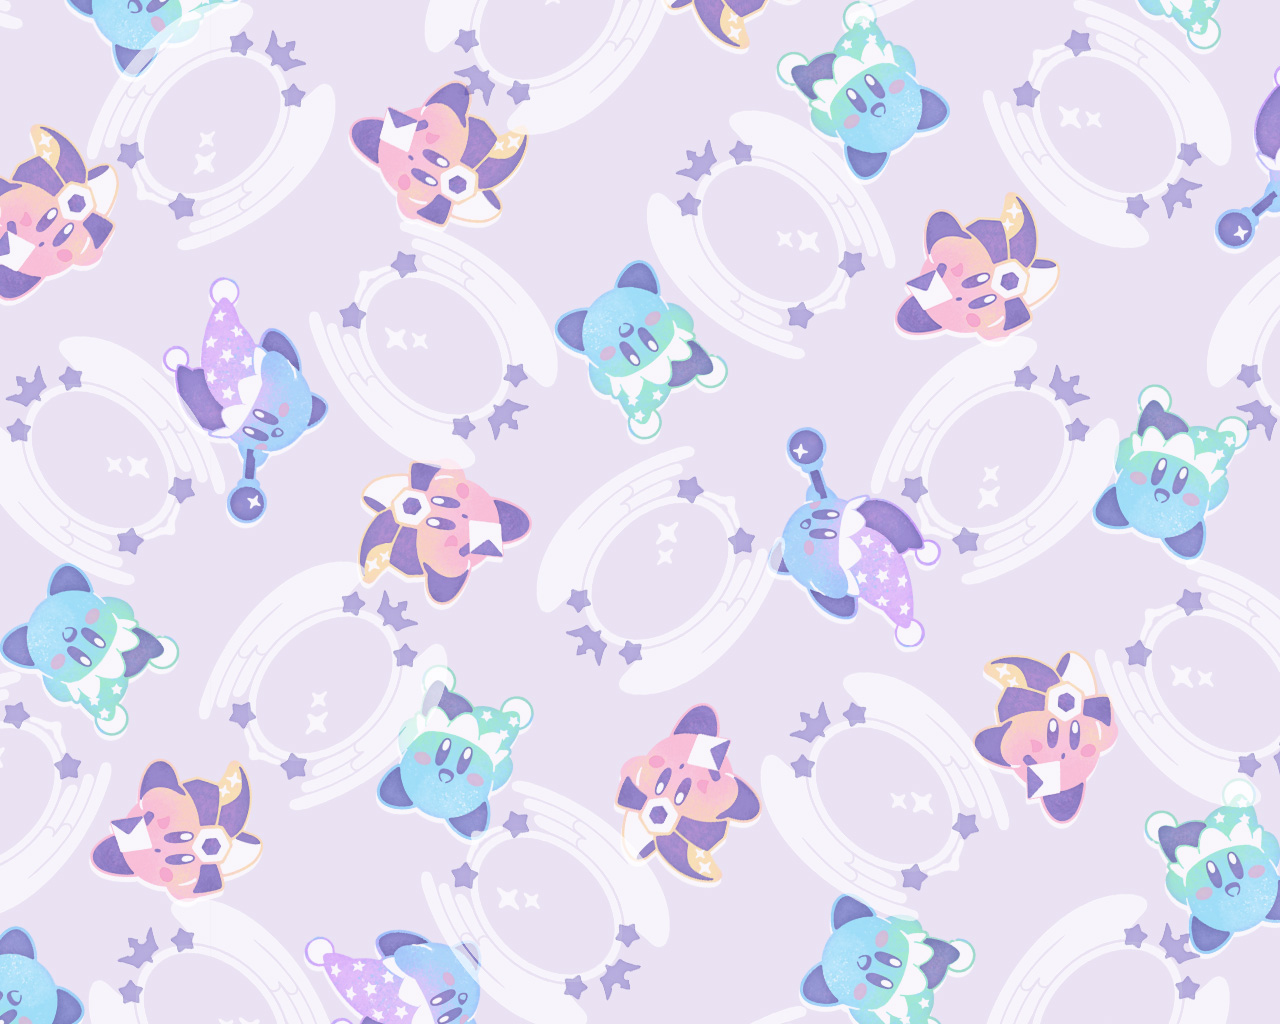 Check Out Some Adorable Kirby Battle Royale Wallpaper My